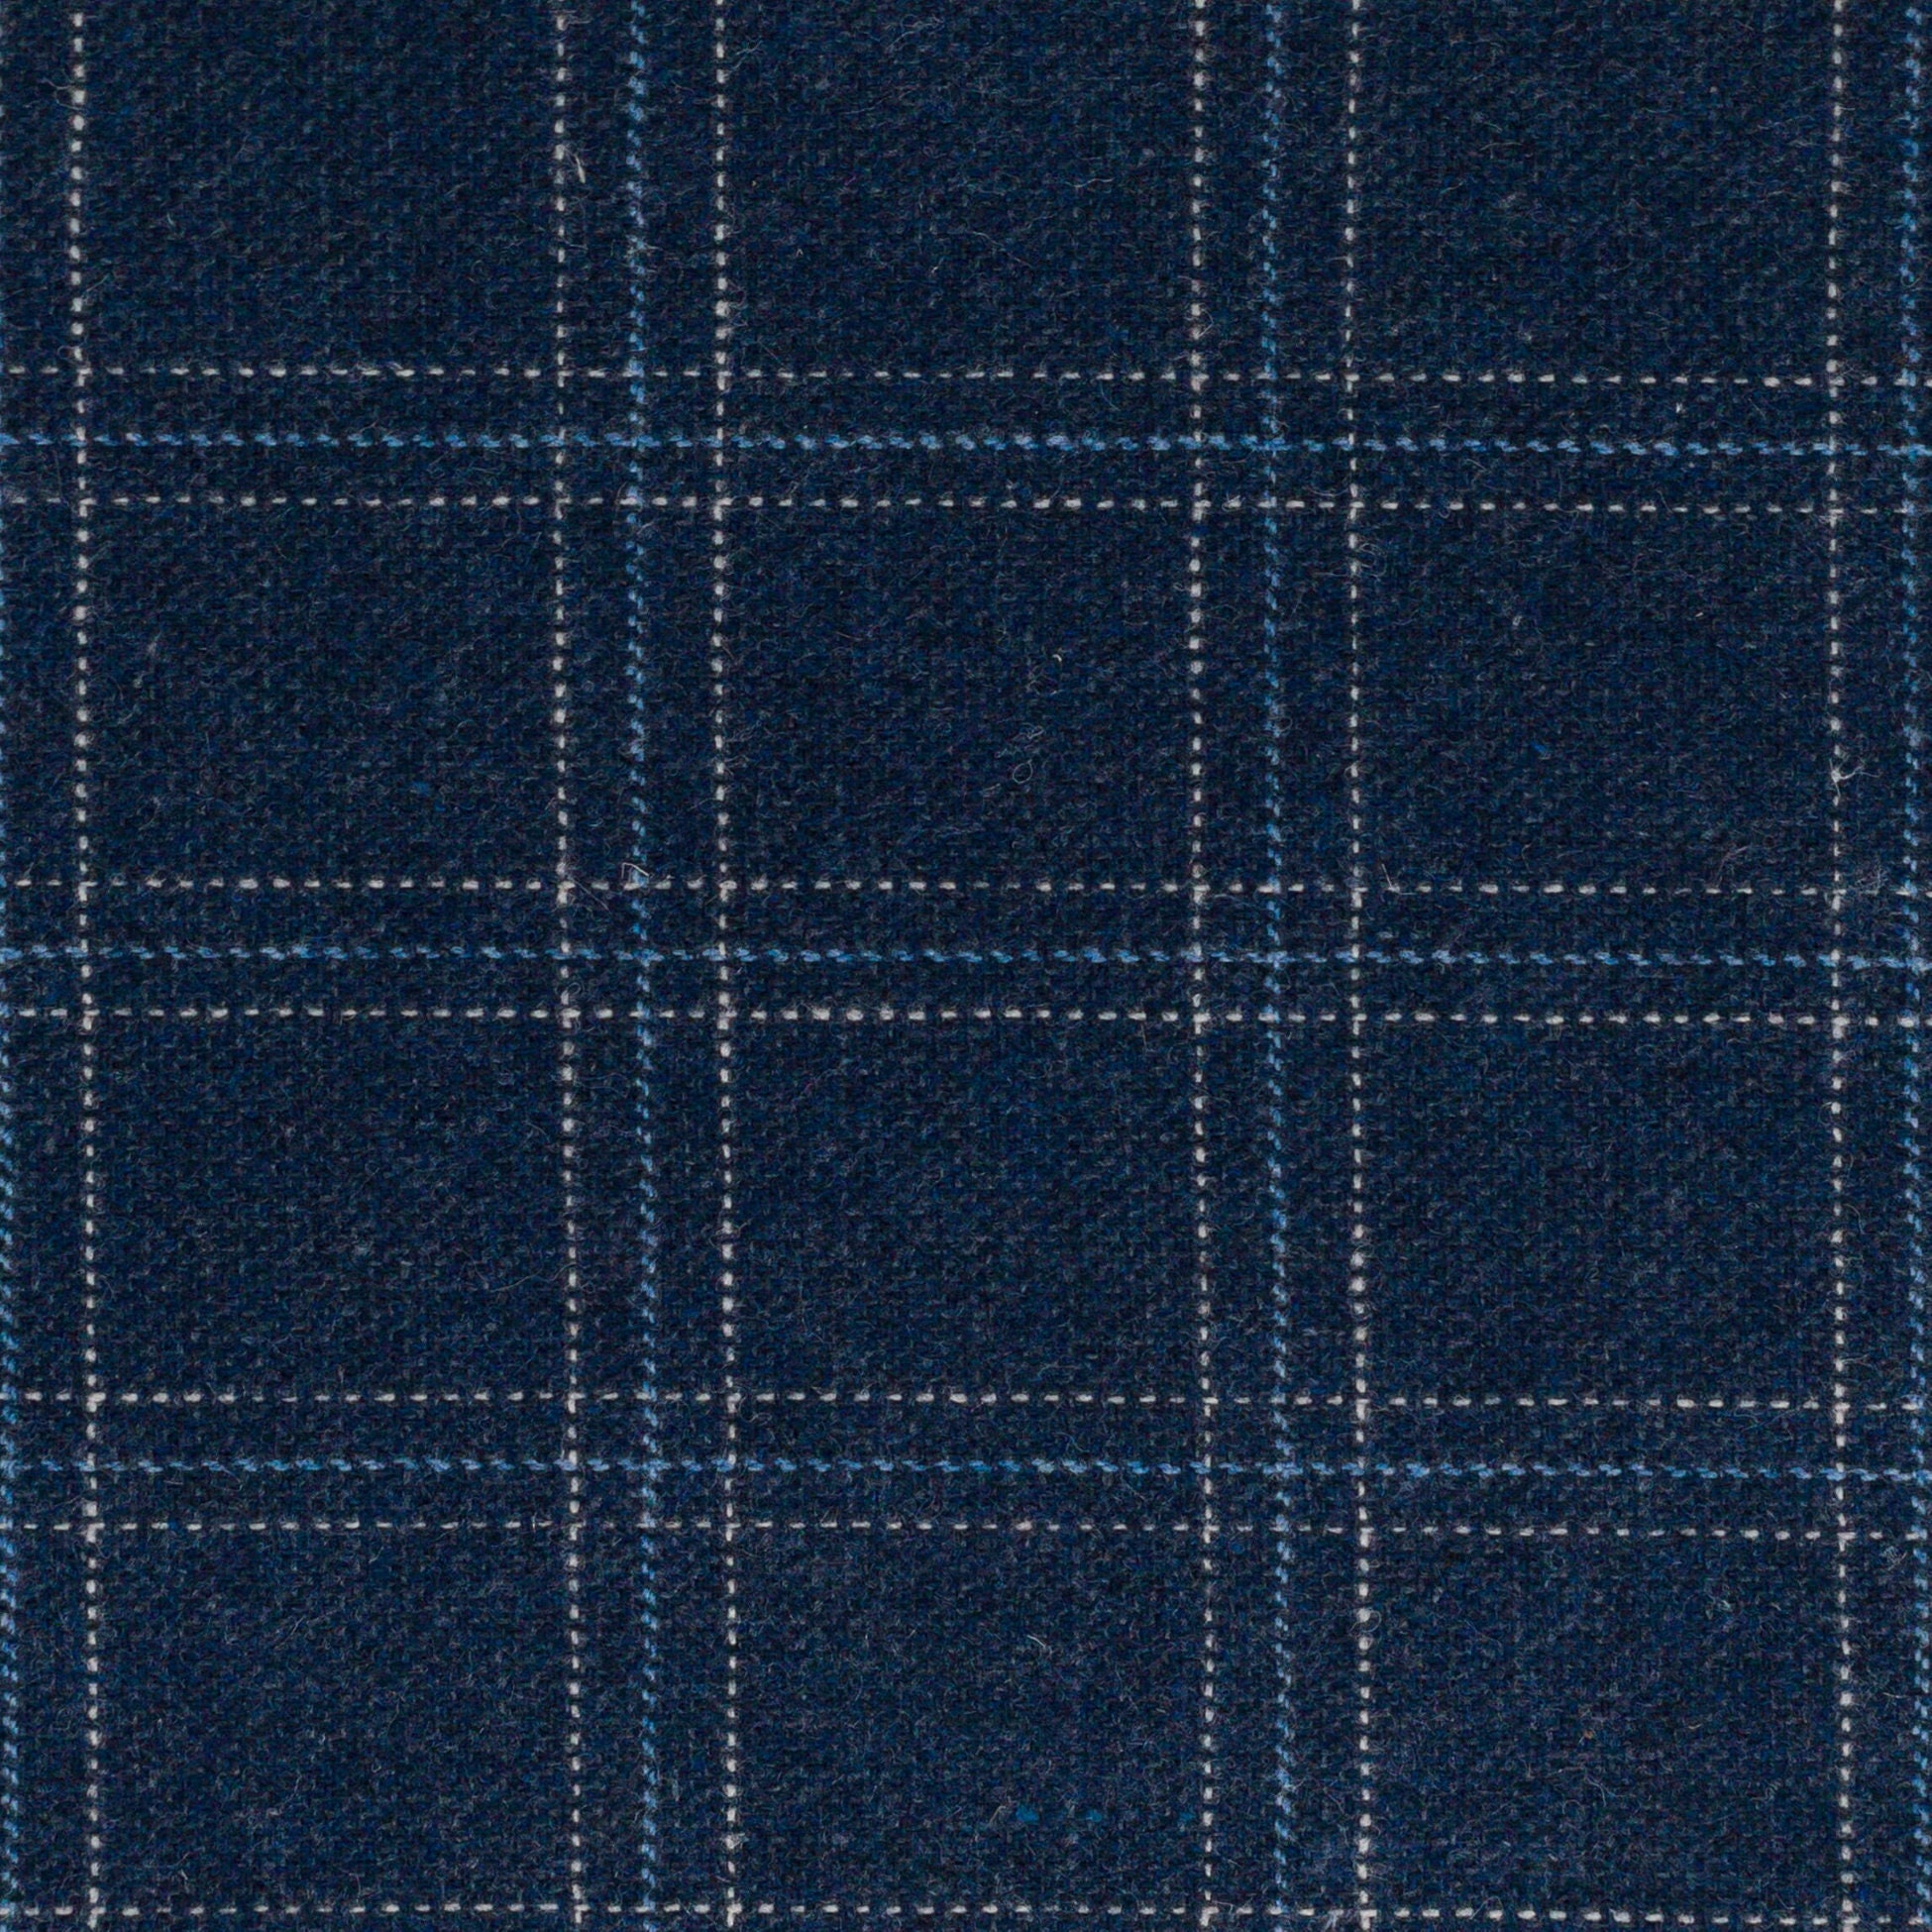 Fabric SP Blue Furniture Upholstery Check Fabric Dark Wool Plaid 281 Plaid Fabric Navy - Plaid Pillow Navy for Fabric Dark Etsy Blue Navy